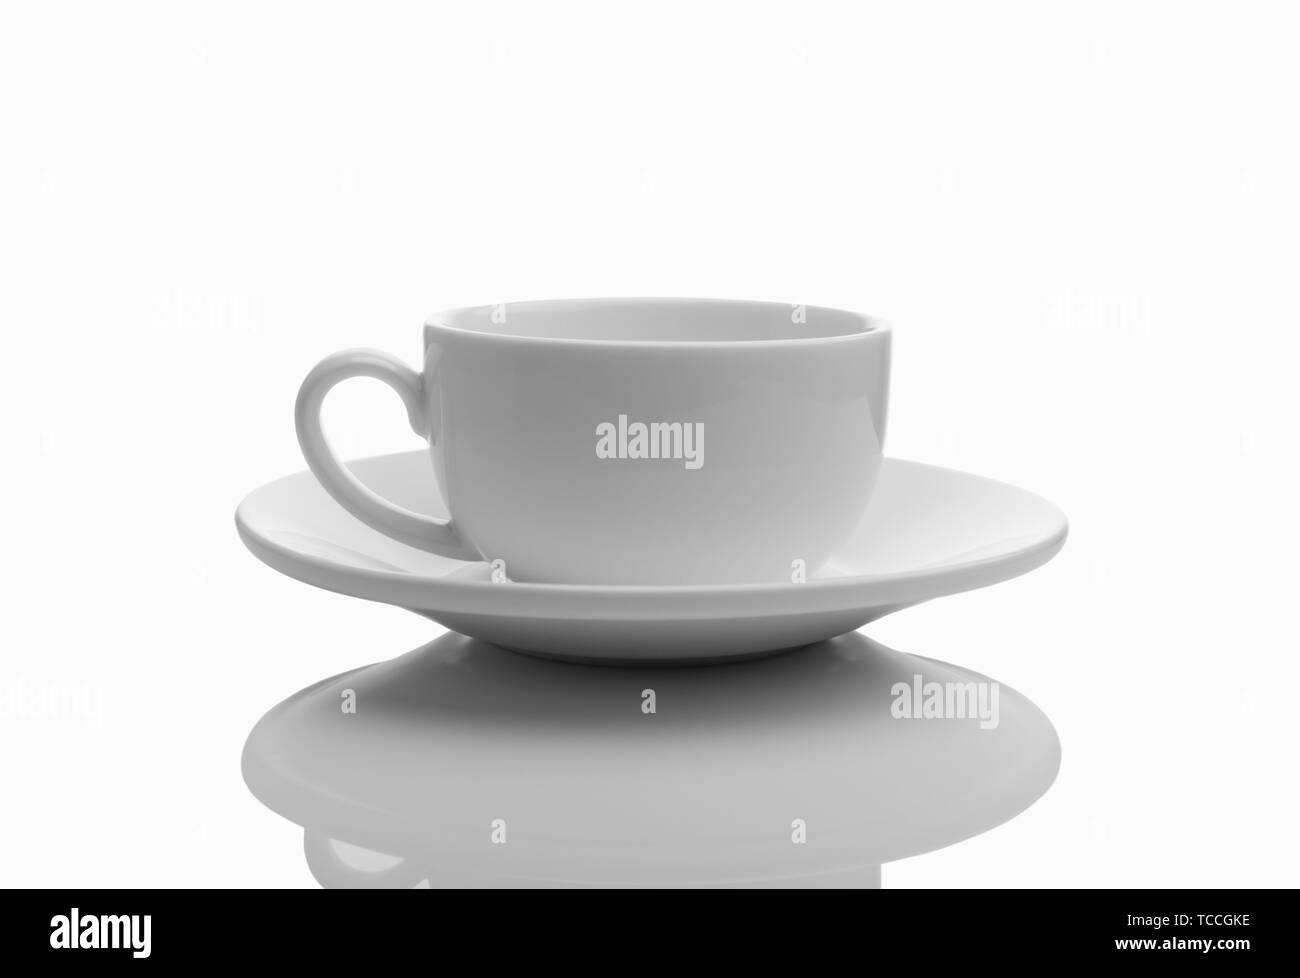 https://c8.alamy.com/comp/TCCGKE/isolated-white-empty-cup-with-a-saucer-on-white-background-TCCGKE.jpg